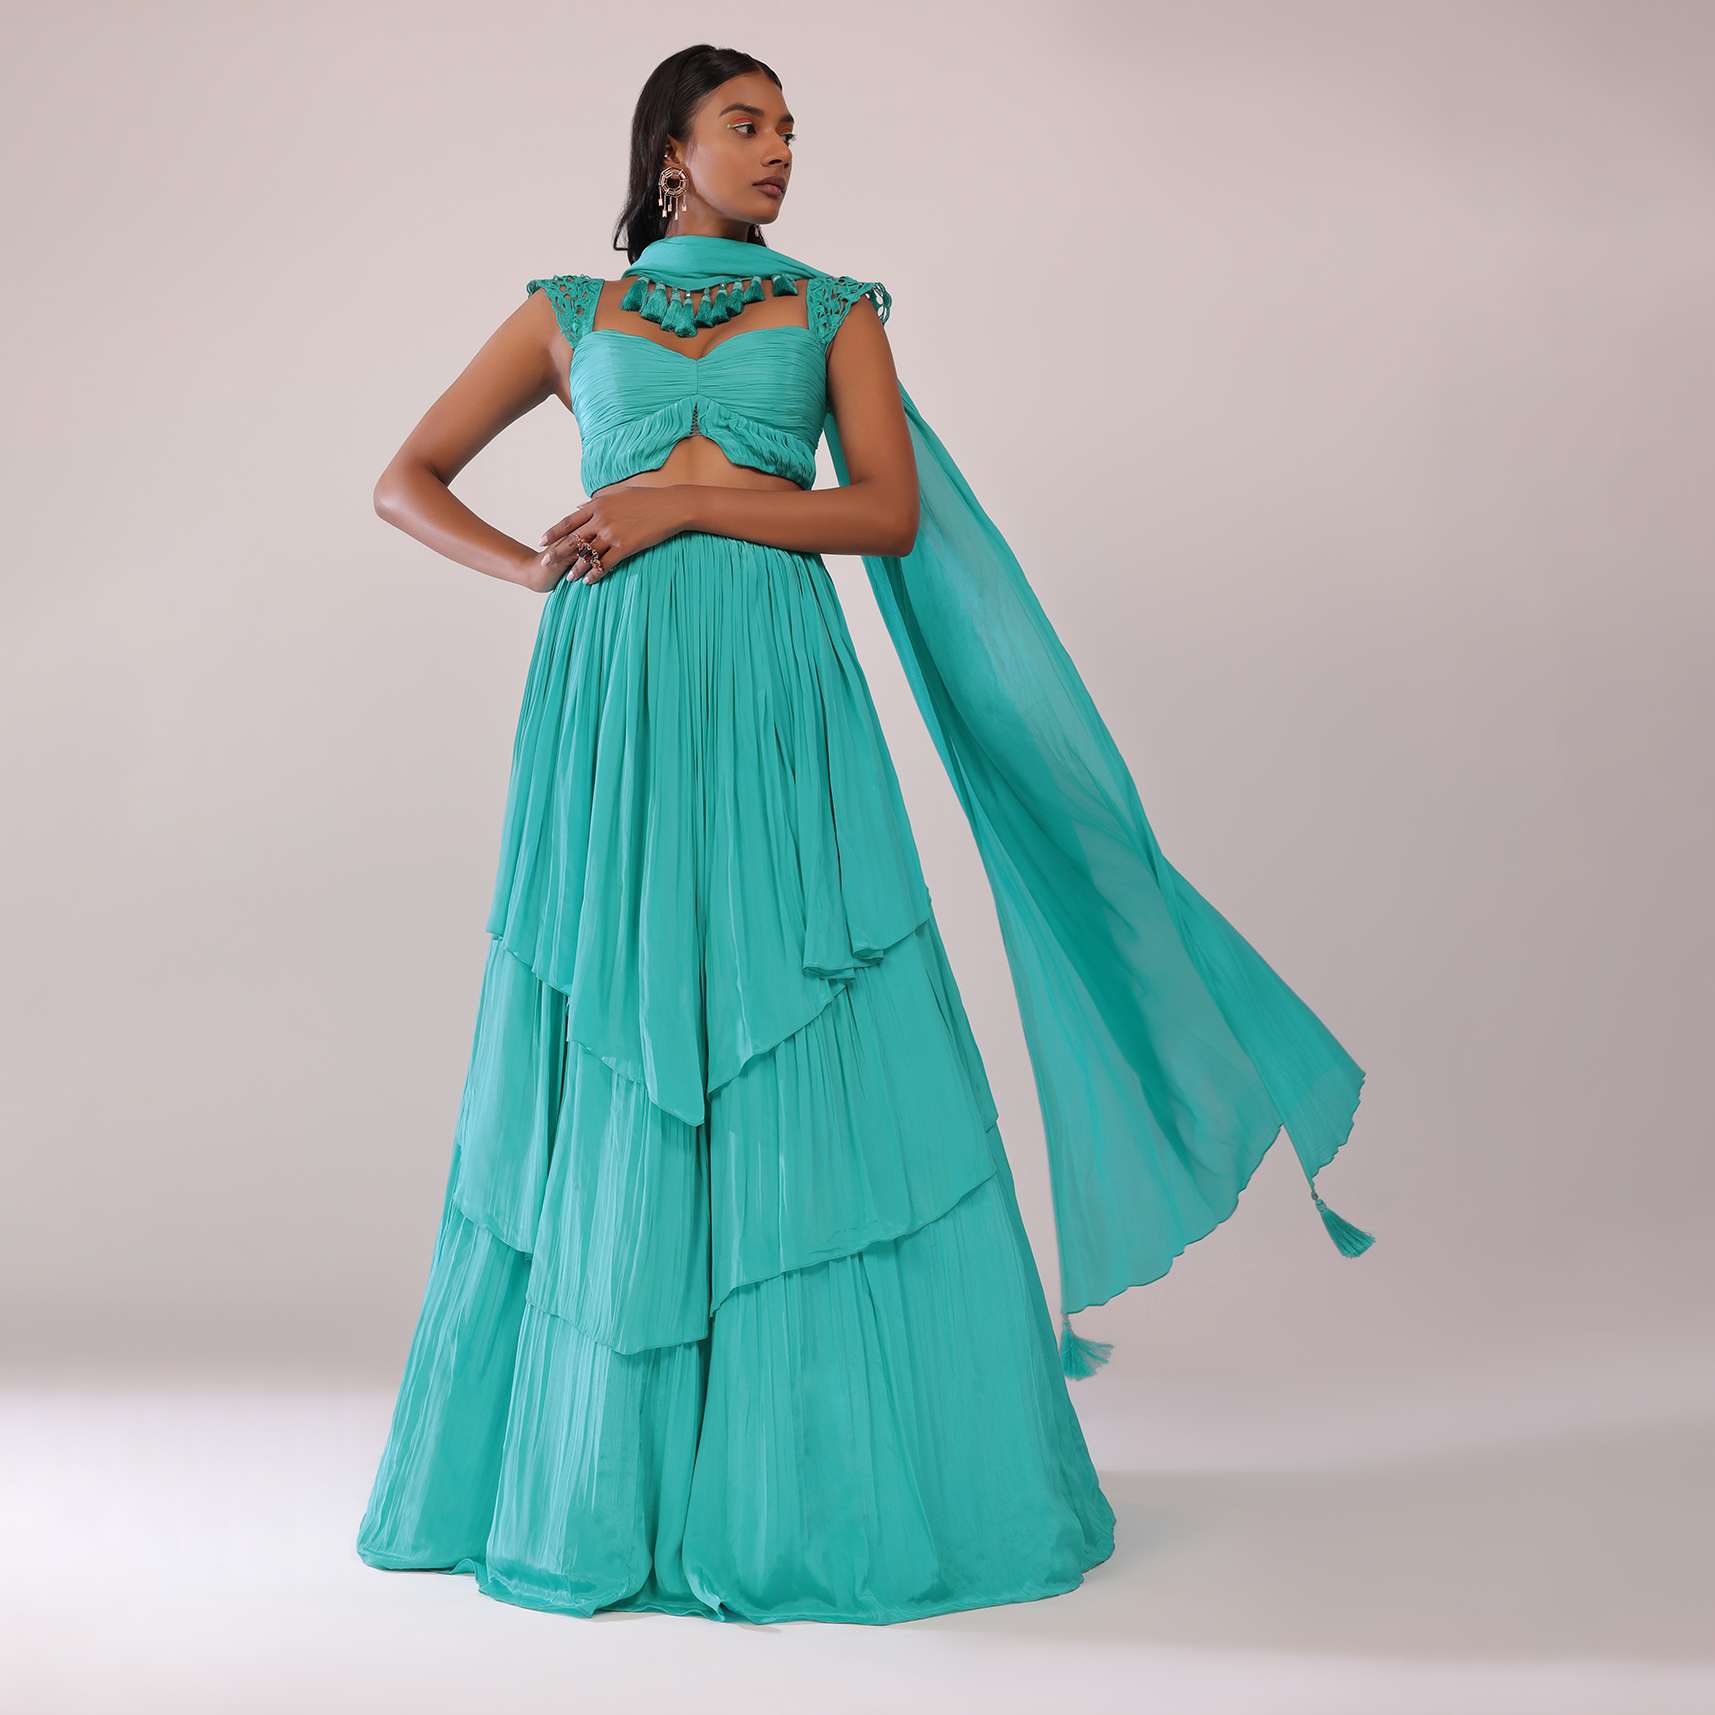 Teal Blue Layered Lehenga And Blouse Set With Choker Dupatta In Crepe